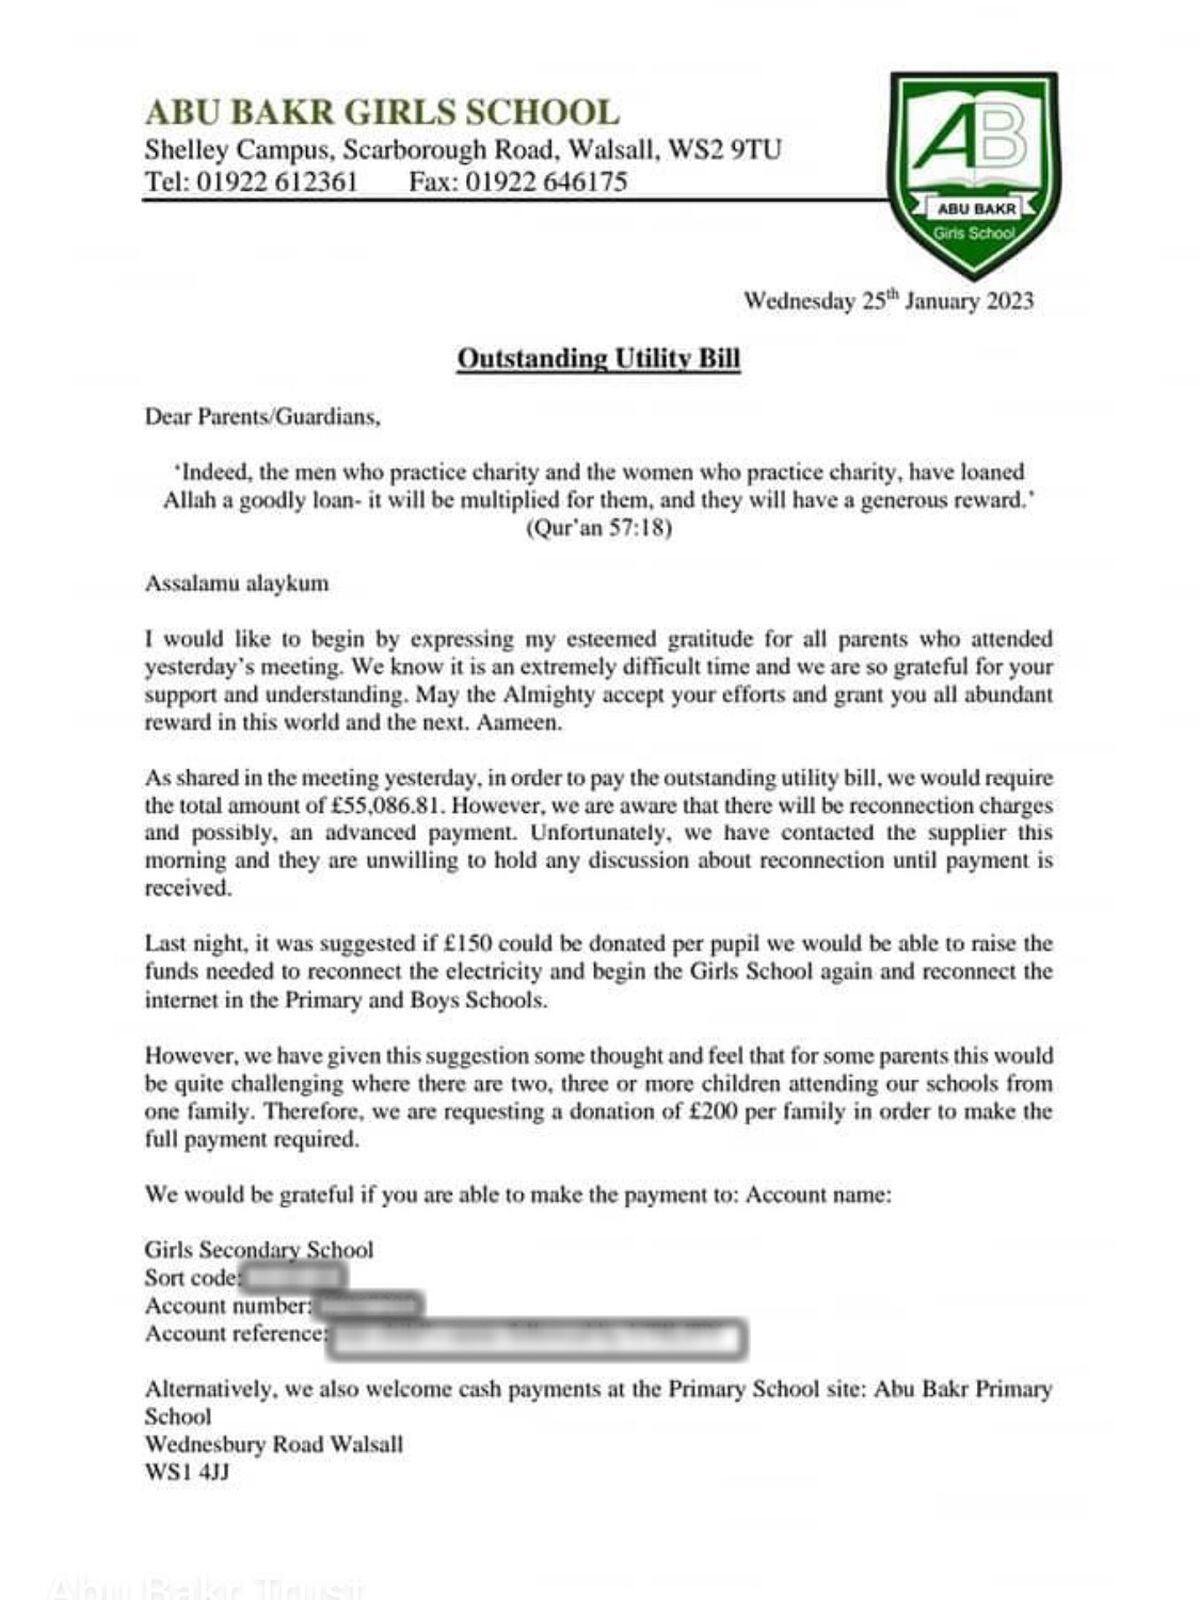 Letter from Abu Bakr School addressed to parents asking for £200 donation per family